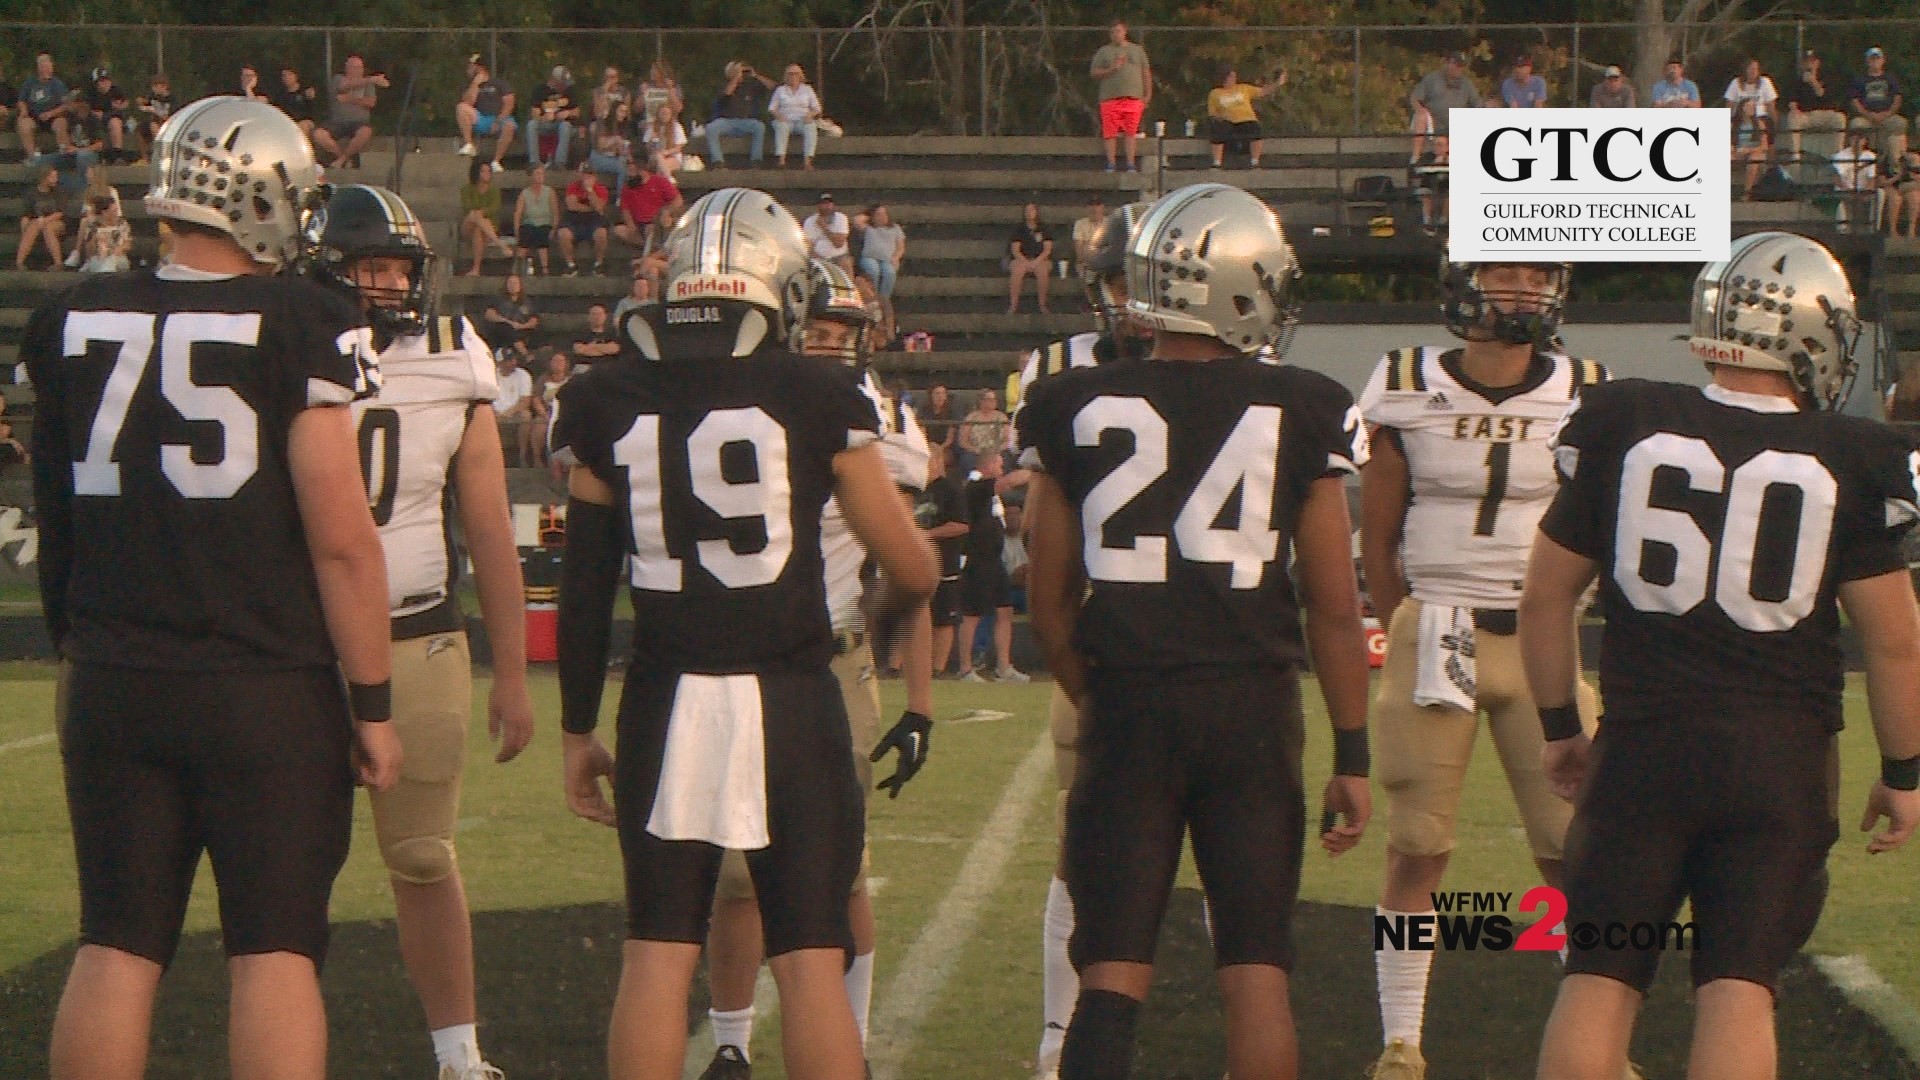 Ledford extends their win streak versus East Davidson to 16 games with the 49-0 win.